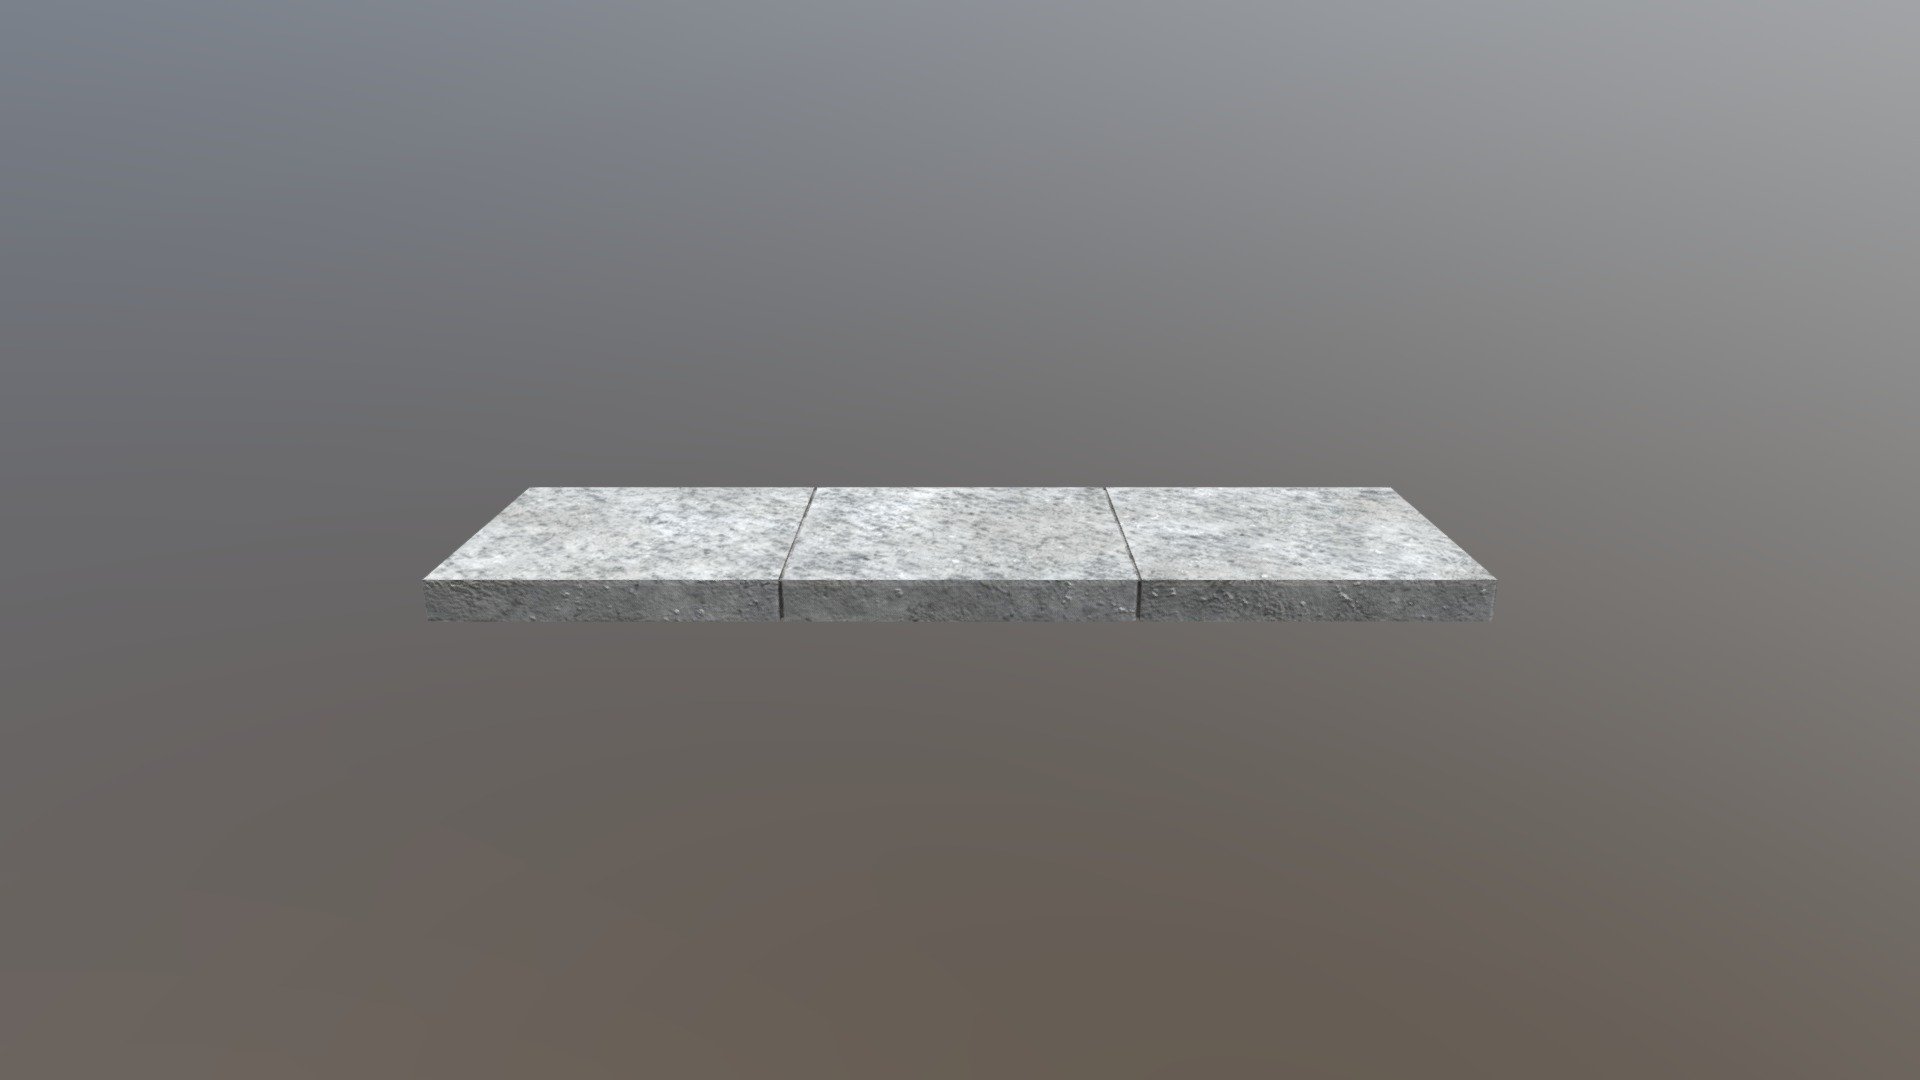 Thsi is the footpath i used in my game prototype i created this based off of other models and images id seen online. To create this model i use Maya and Substance painter to create an texture this model - Footpath - 3D model by James Henderson (@XxDaLeK15xX) 3d model